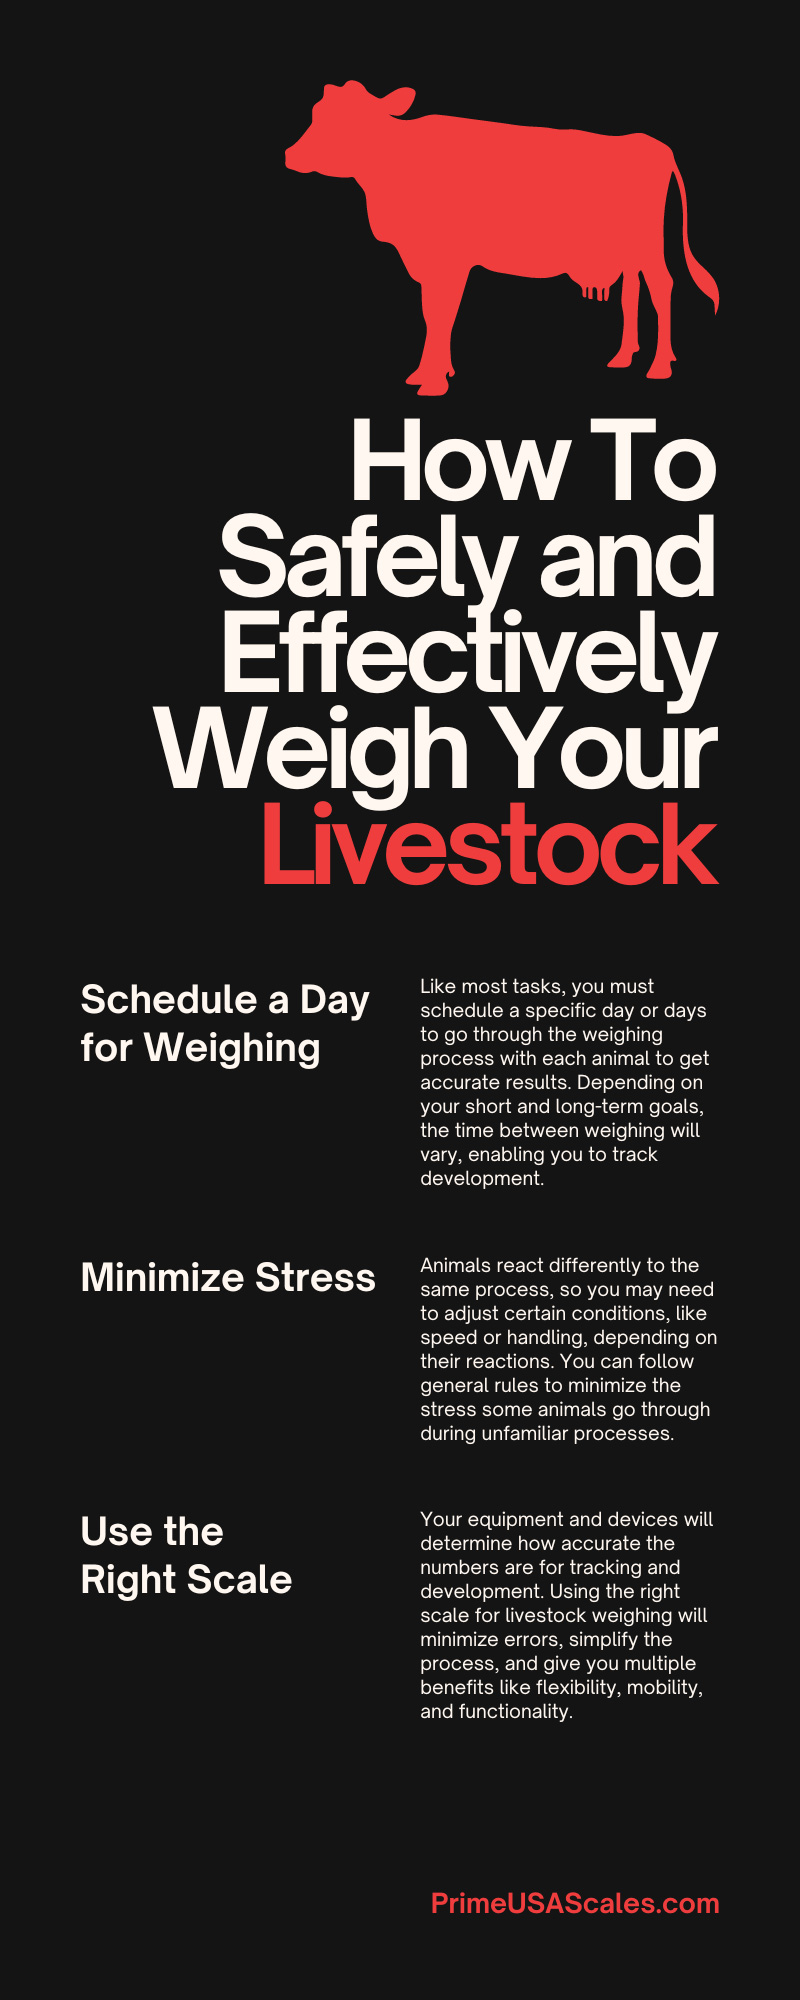 How To Safely and Effectively Weigh Your Livestock